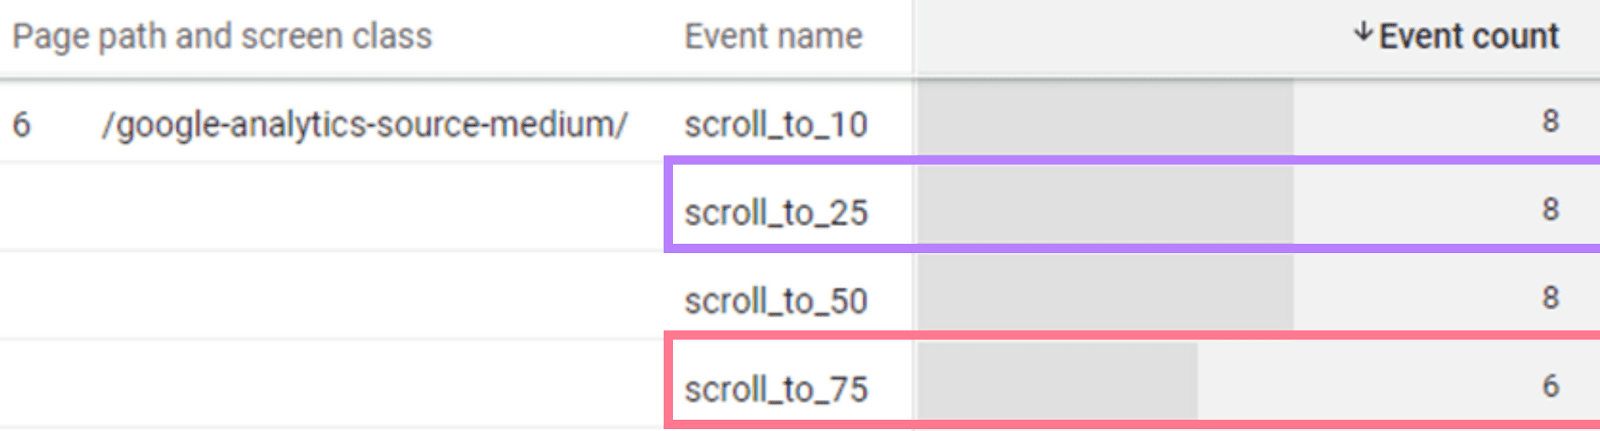 Event number  shown successful  a array  for scroll_to_25 events and scroll_to_75 events